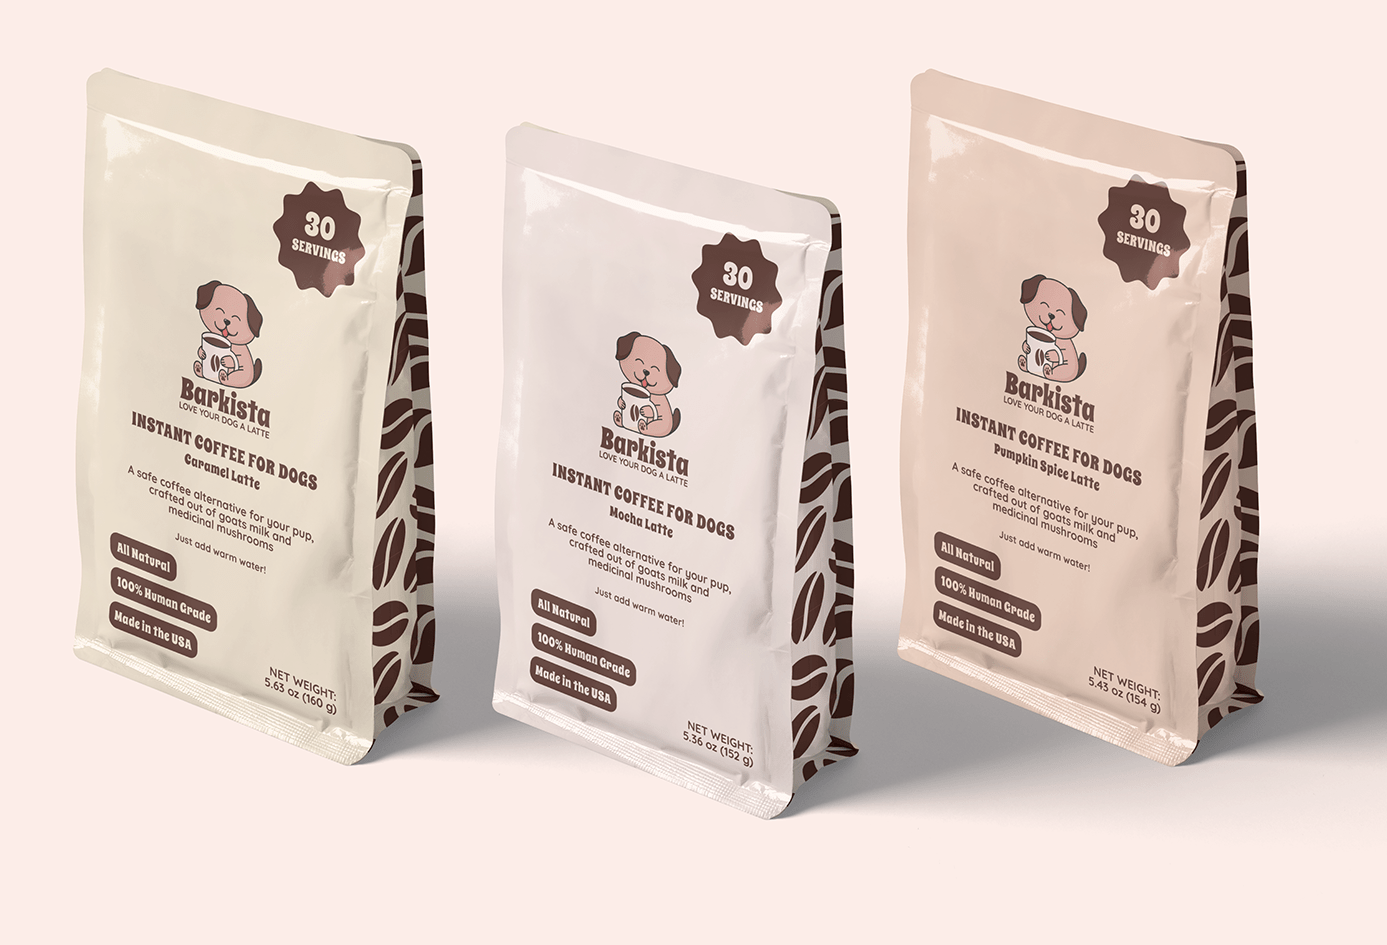 3 images of coffee powder bags